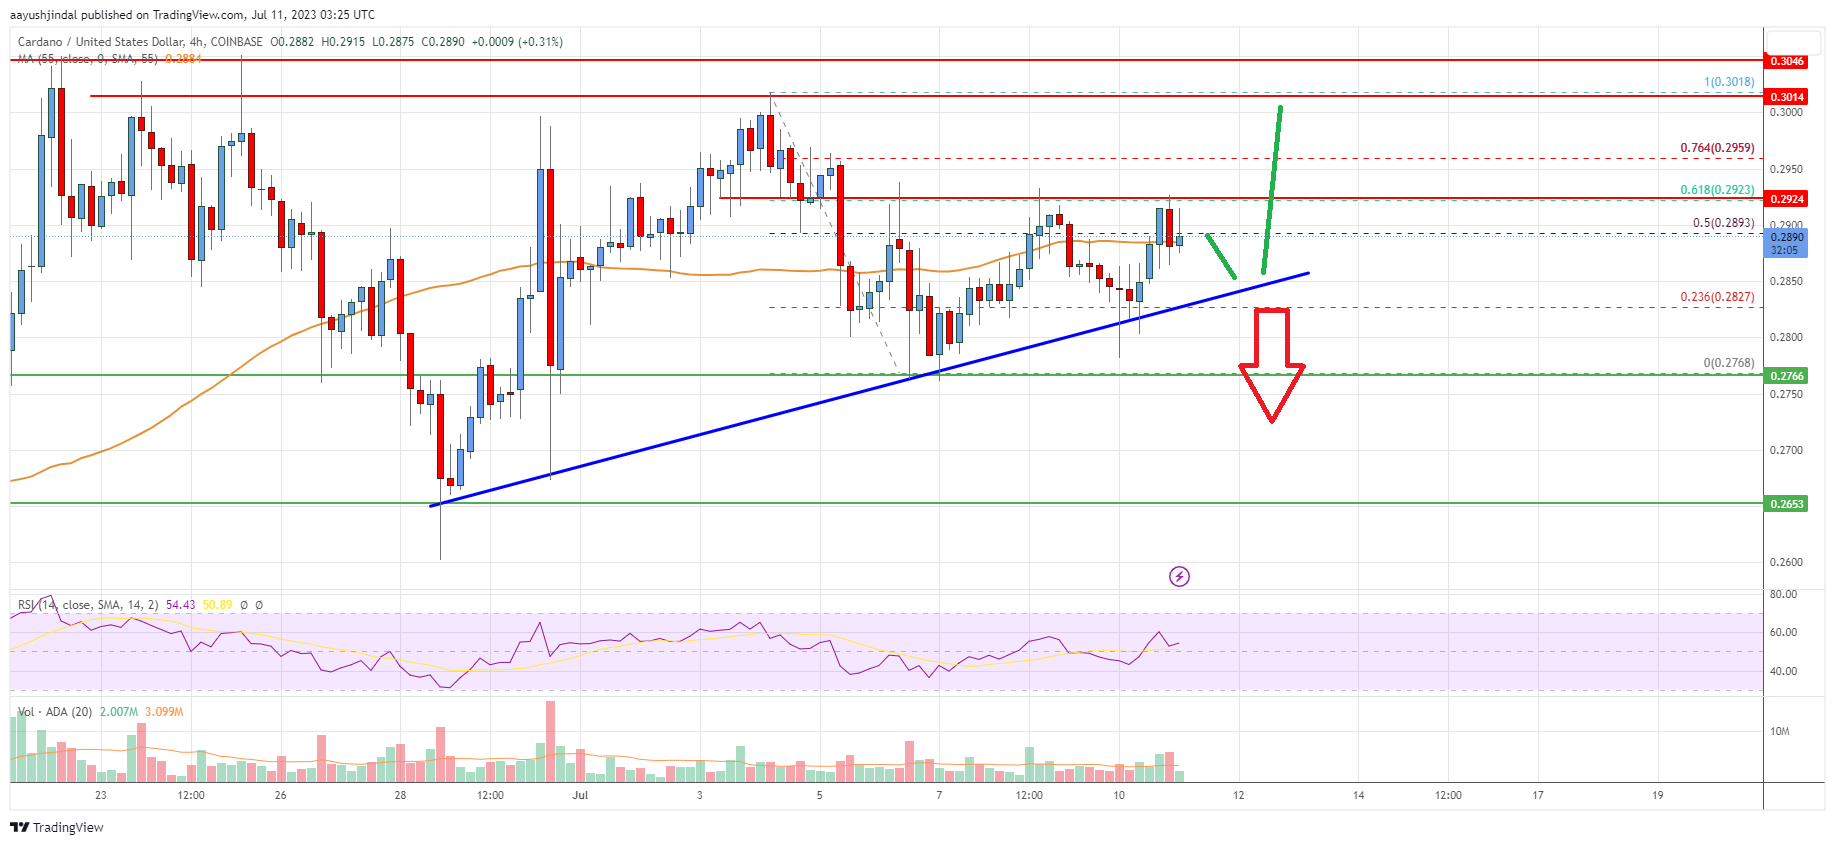 Cardano (ADA) Price Analysis: Is the Recovery Just Getting Started?